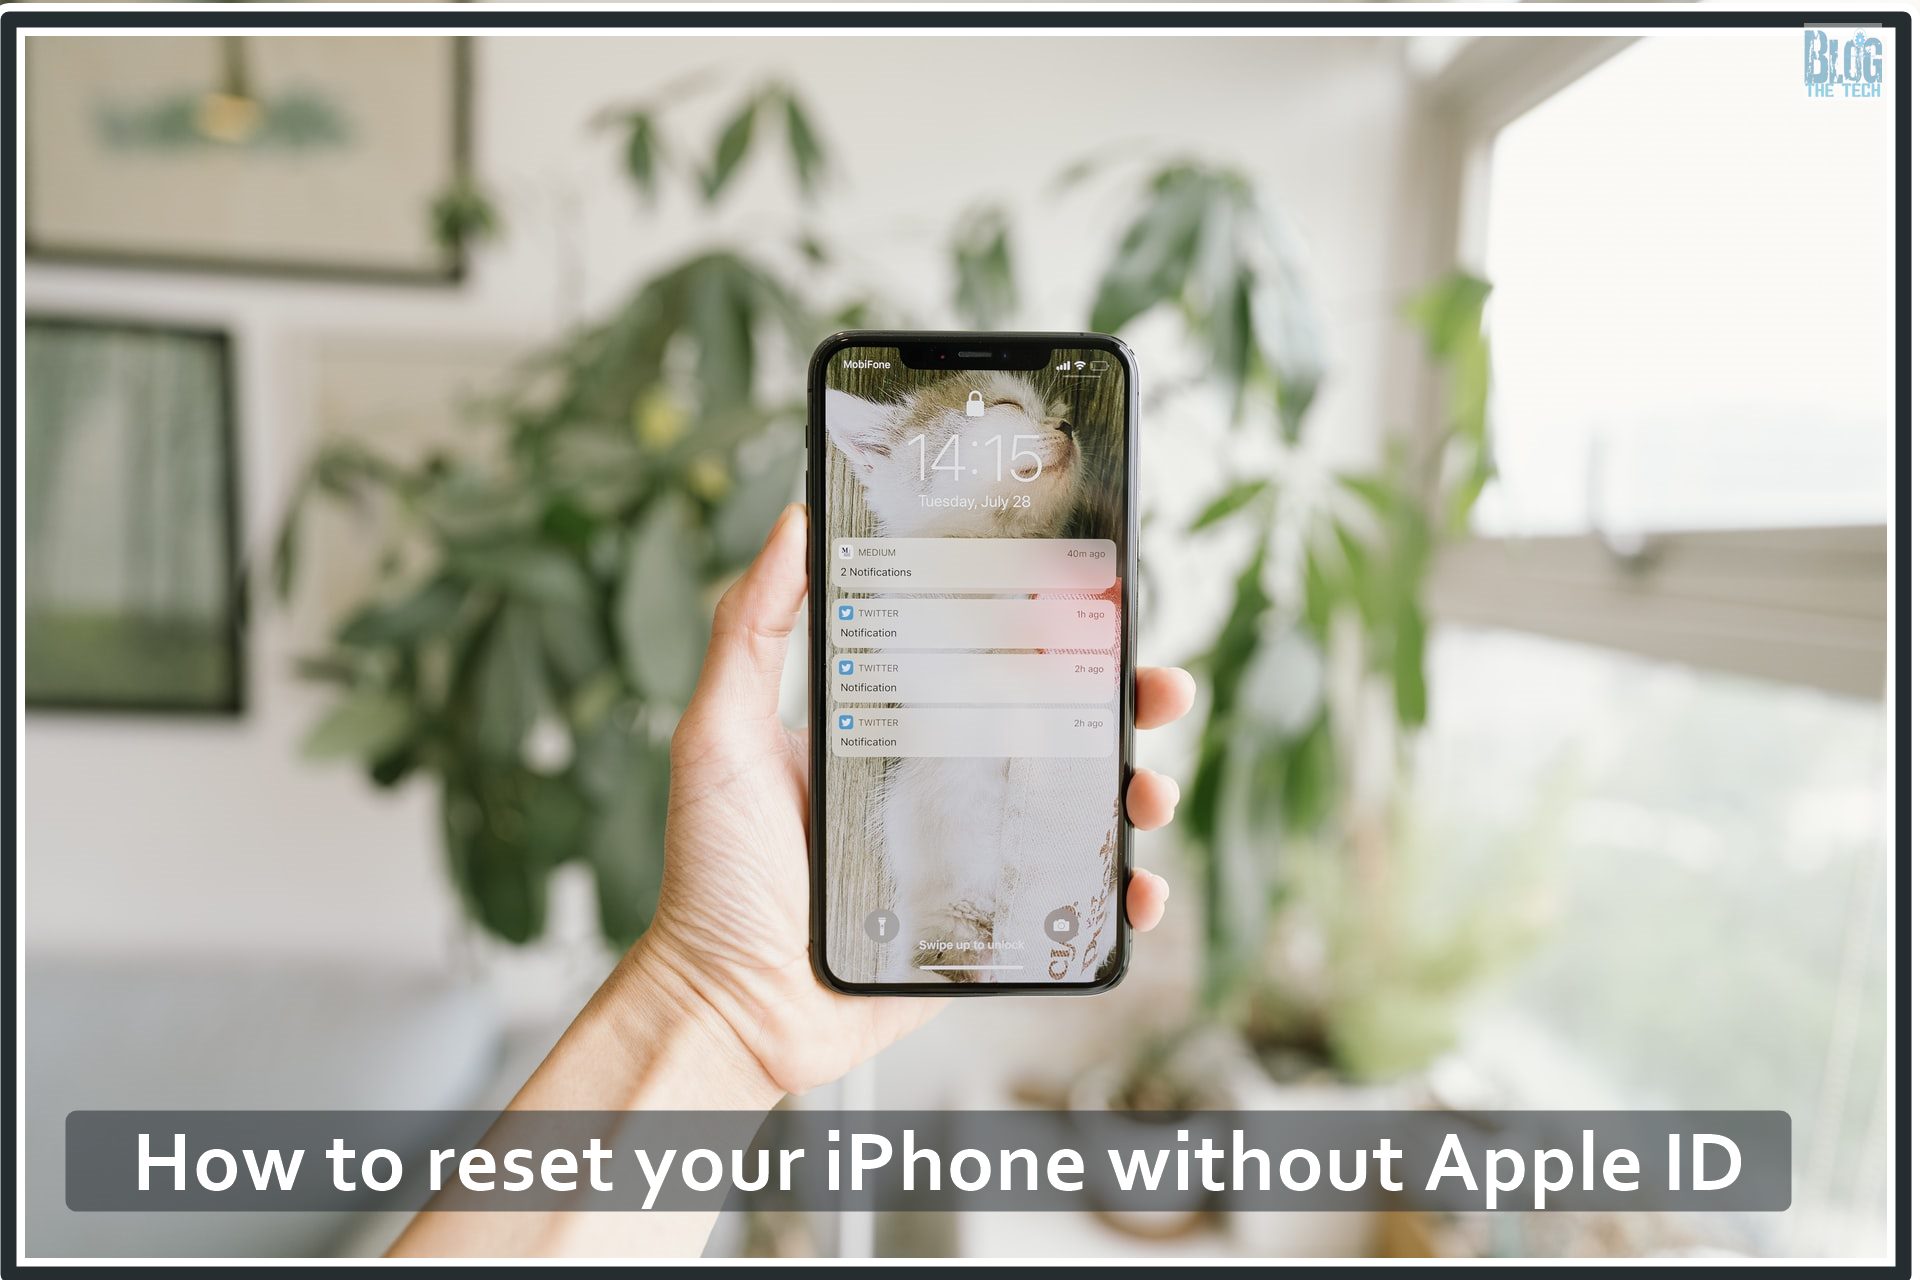 How to reset your iPhone without Apple ID